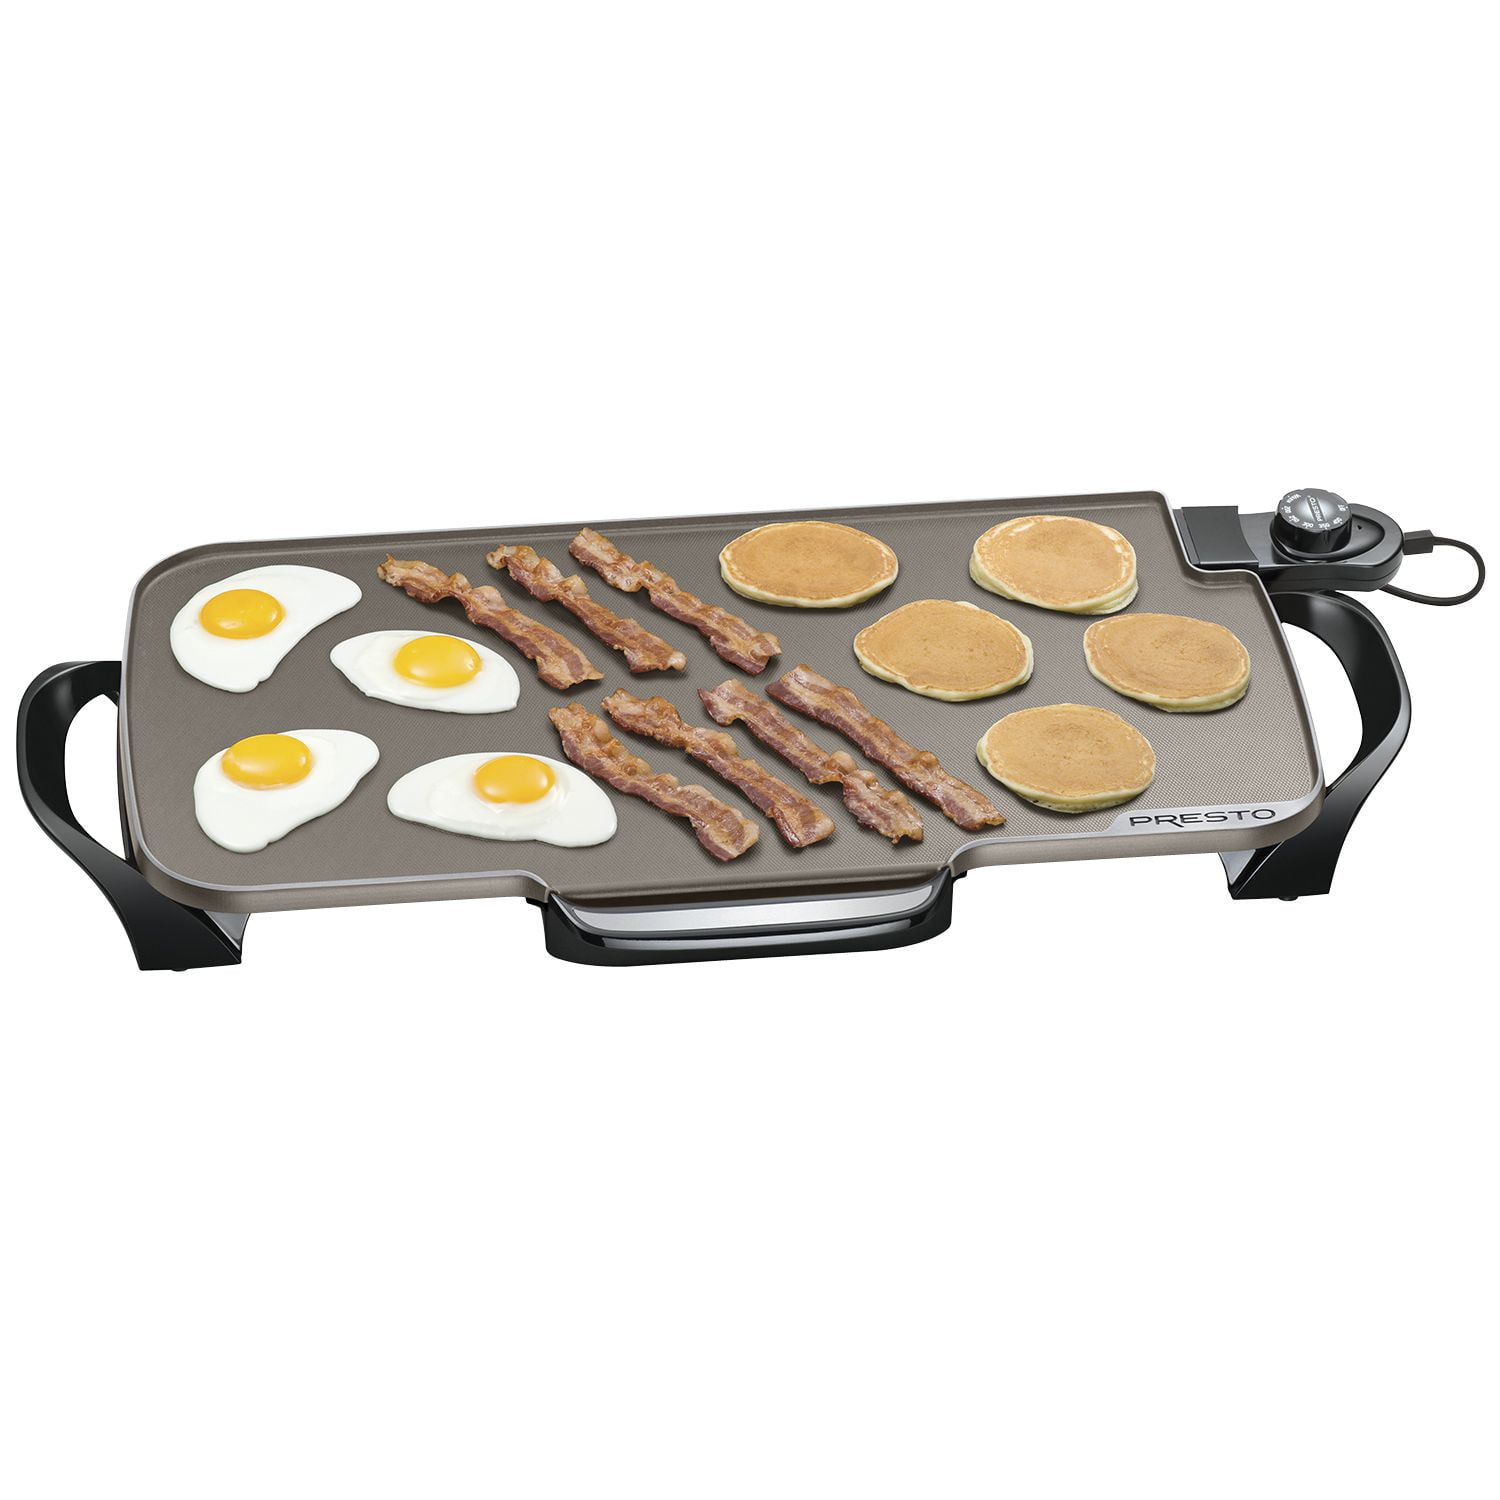 presto-22-inch-electric-griddle-with-removable-handles-07062-home